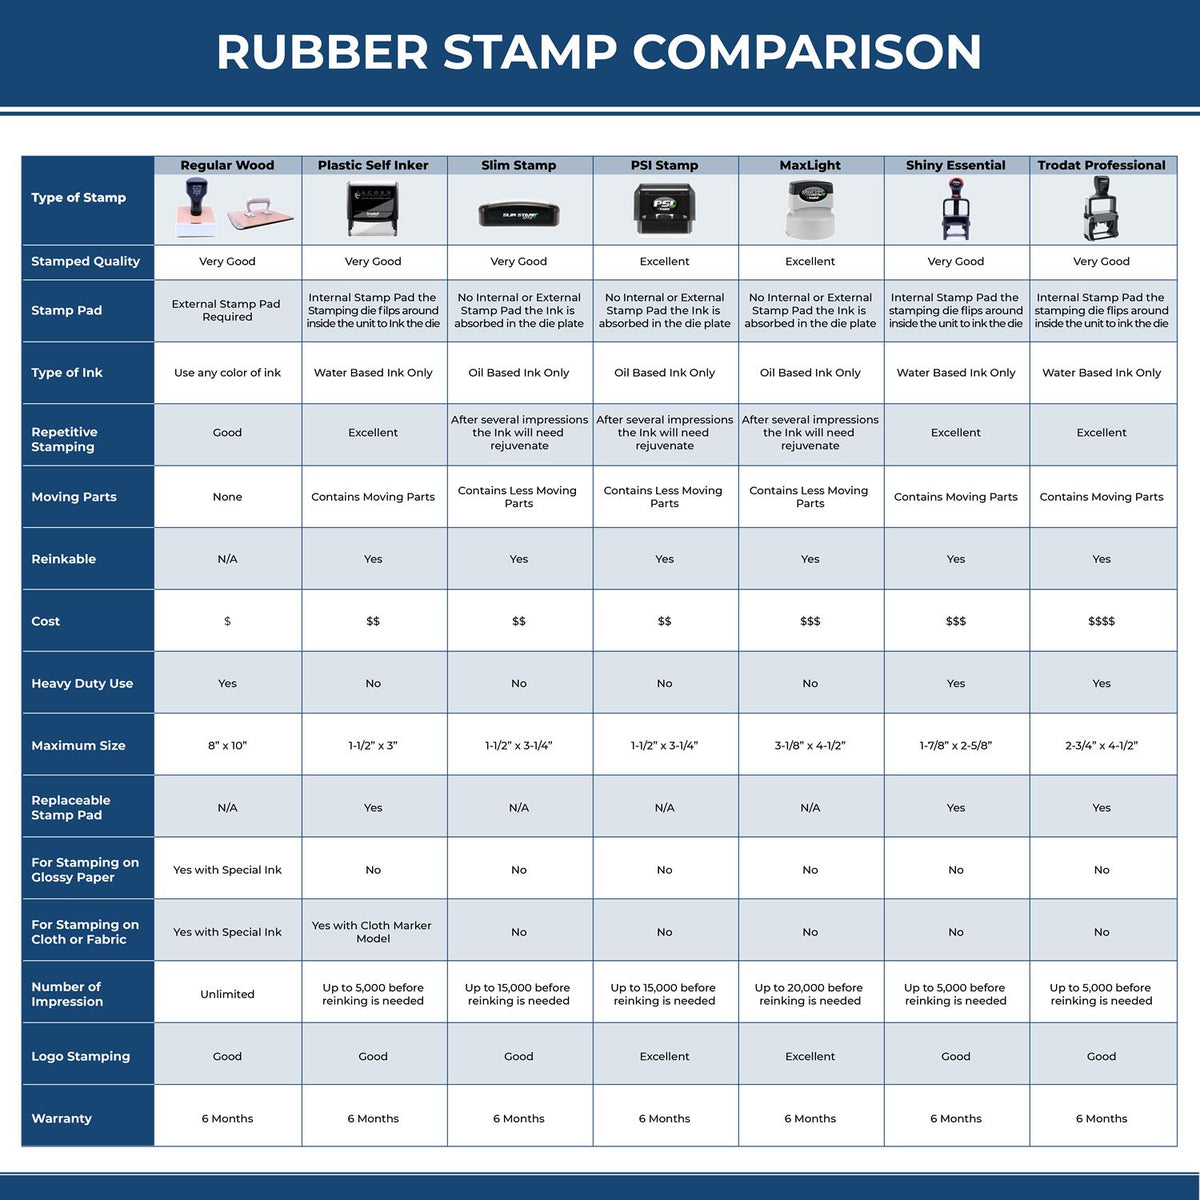 Self-Inking Economy Rate Stamp 4065S Rubber Stamp Comparison